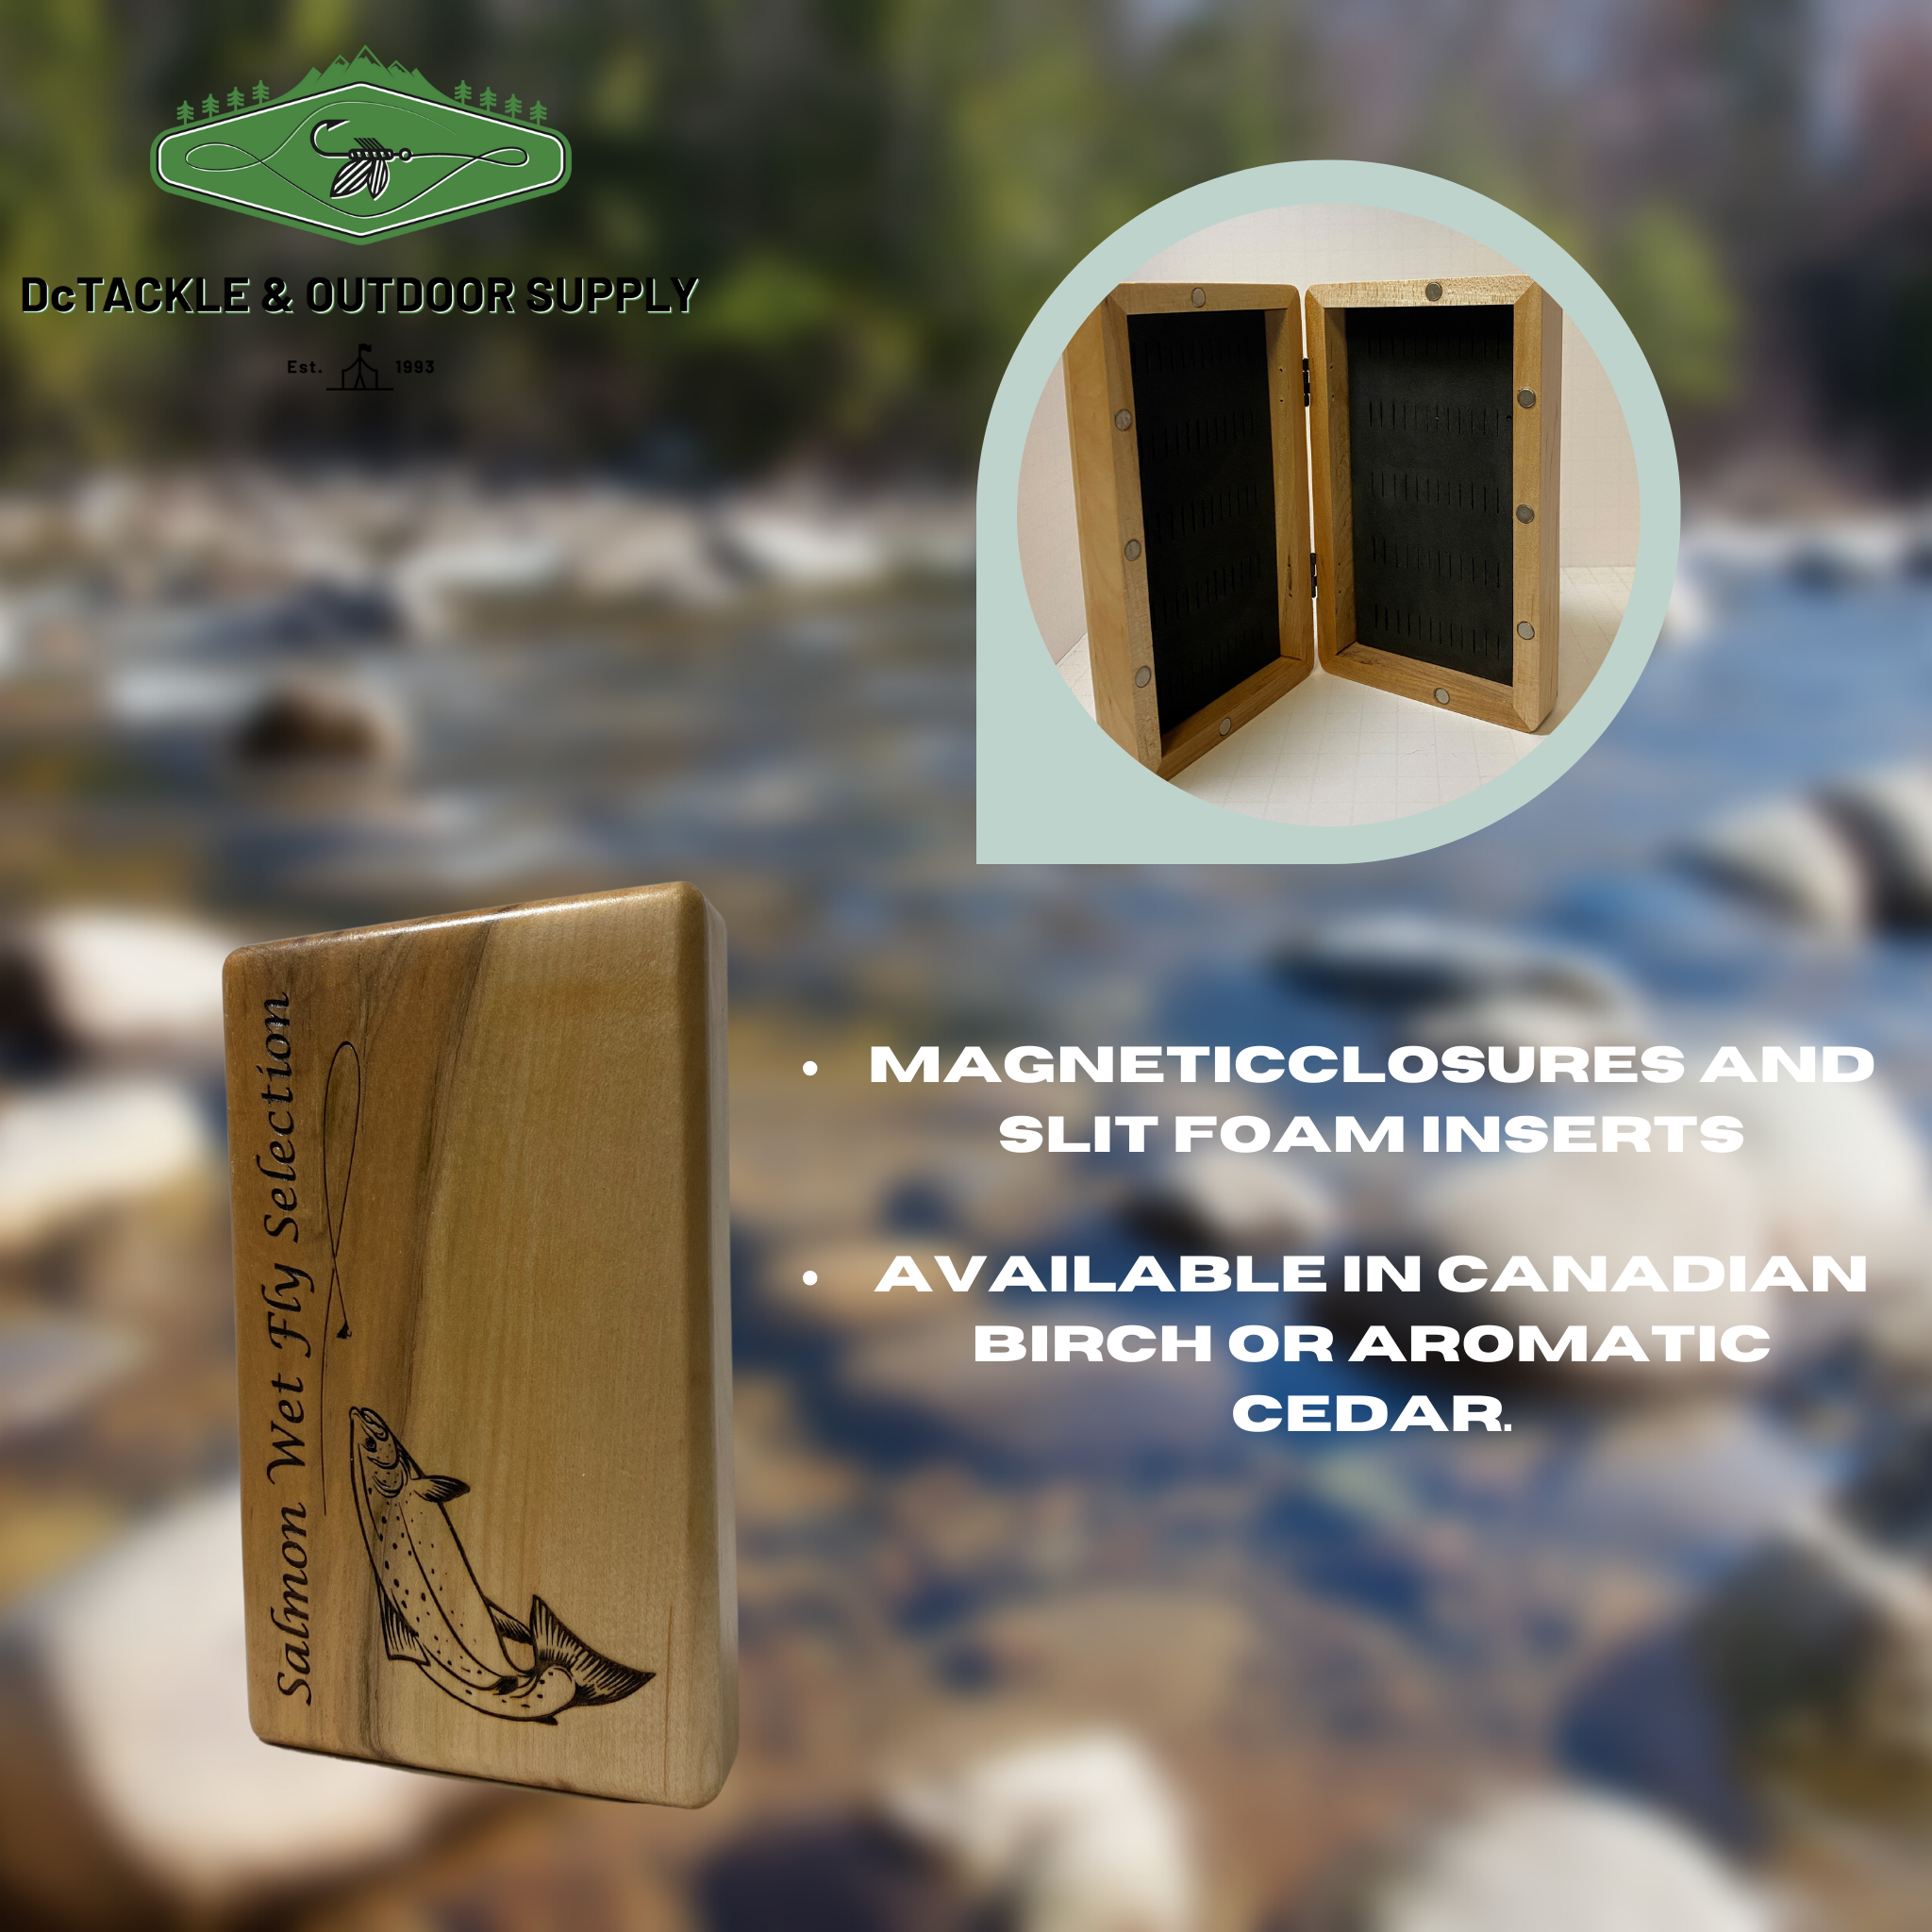 Local Hand Crafted Wooden Flyboxes & Fly Kits – Dc Tackle & Outdoor Supply